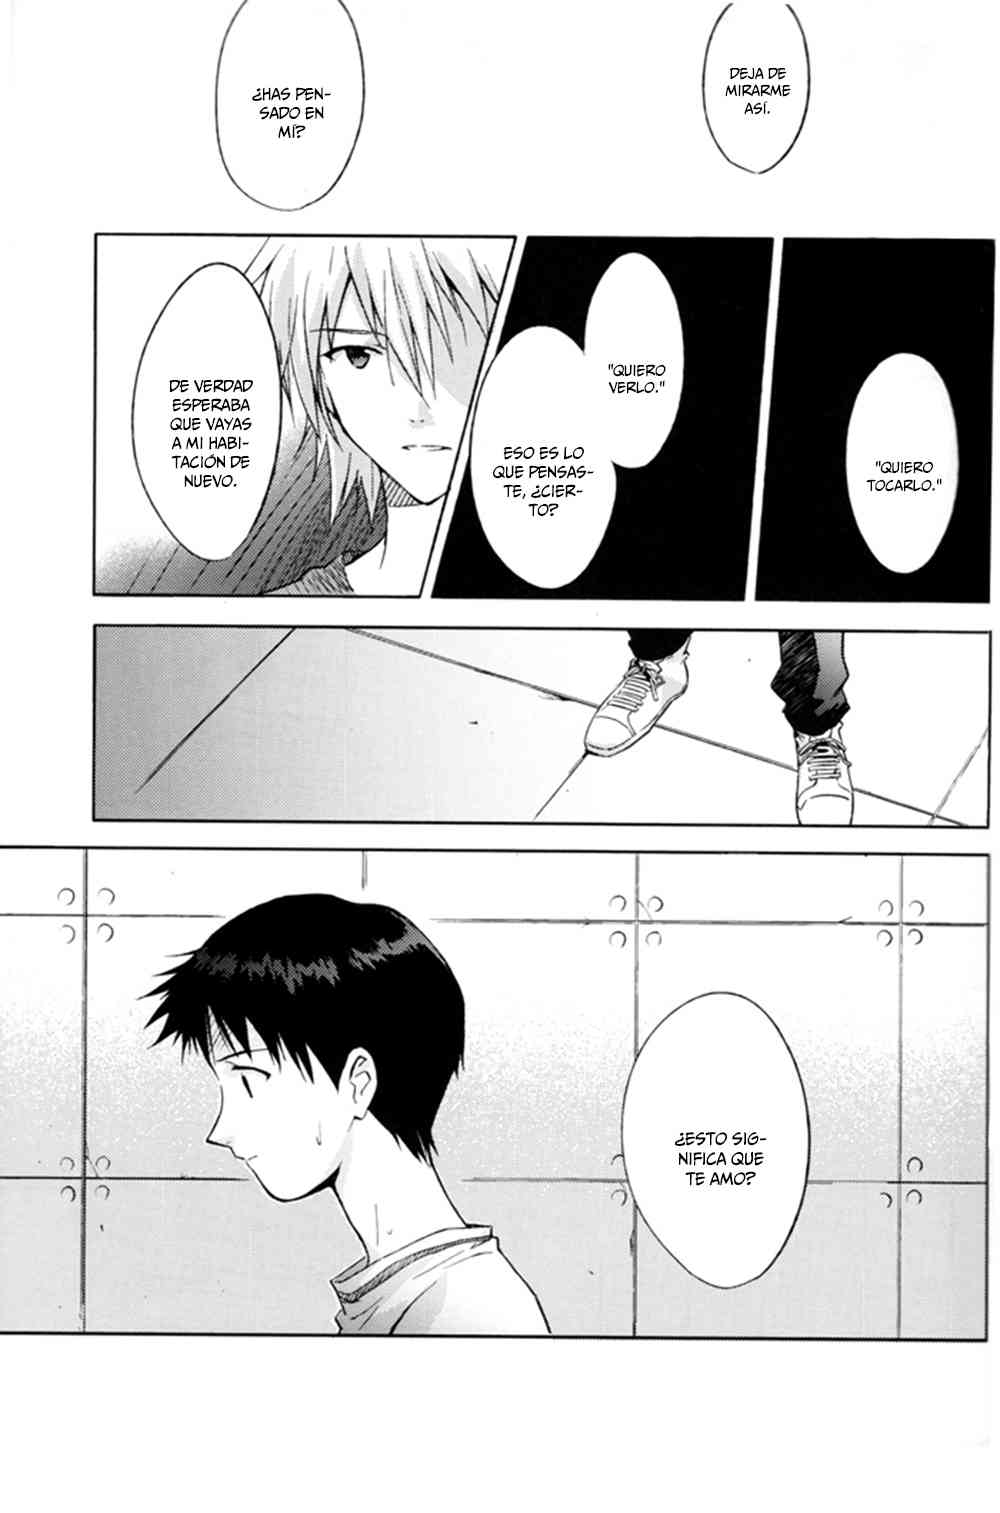 Doujinshi Evangelion-And down & down Chapter-0 - 11